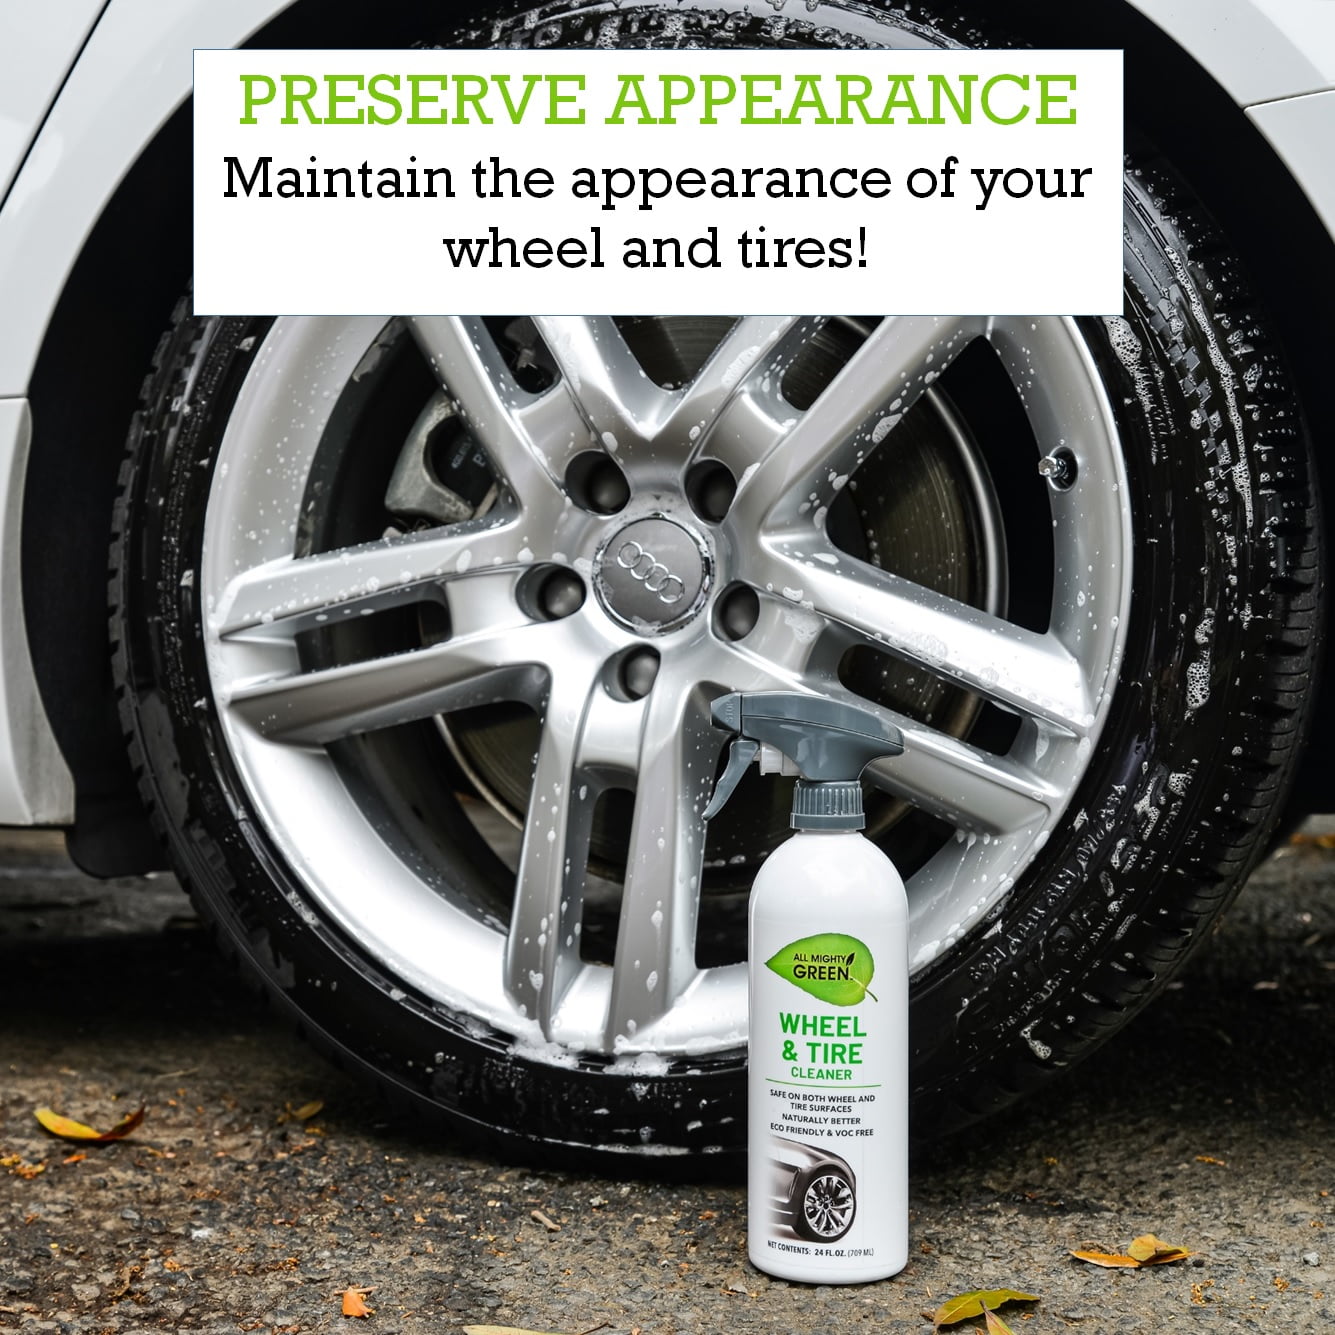 All Mighty Green 24 oz. Automotive Tire Shine, Eco-Friendly; VOC Free; Non-Toxic; Trigger Spray Bottle(2-Pack)